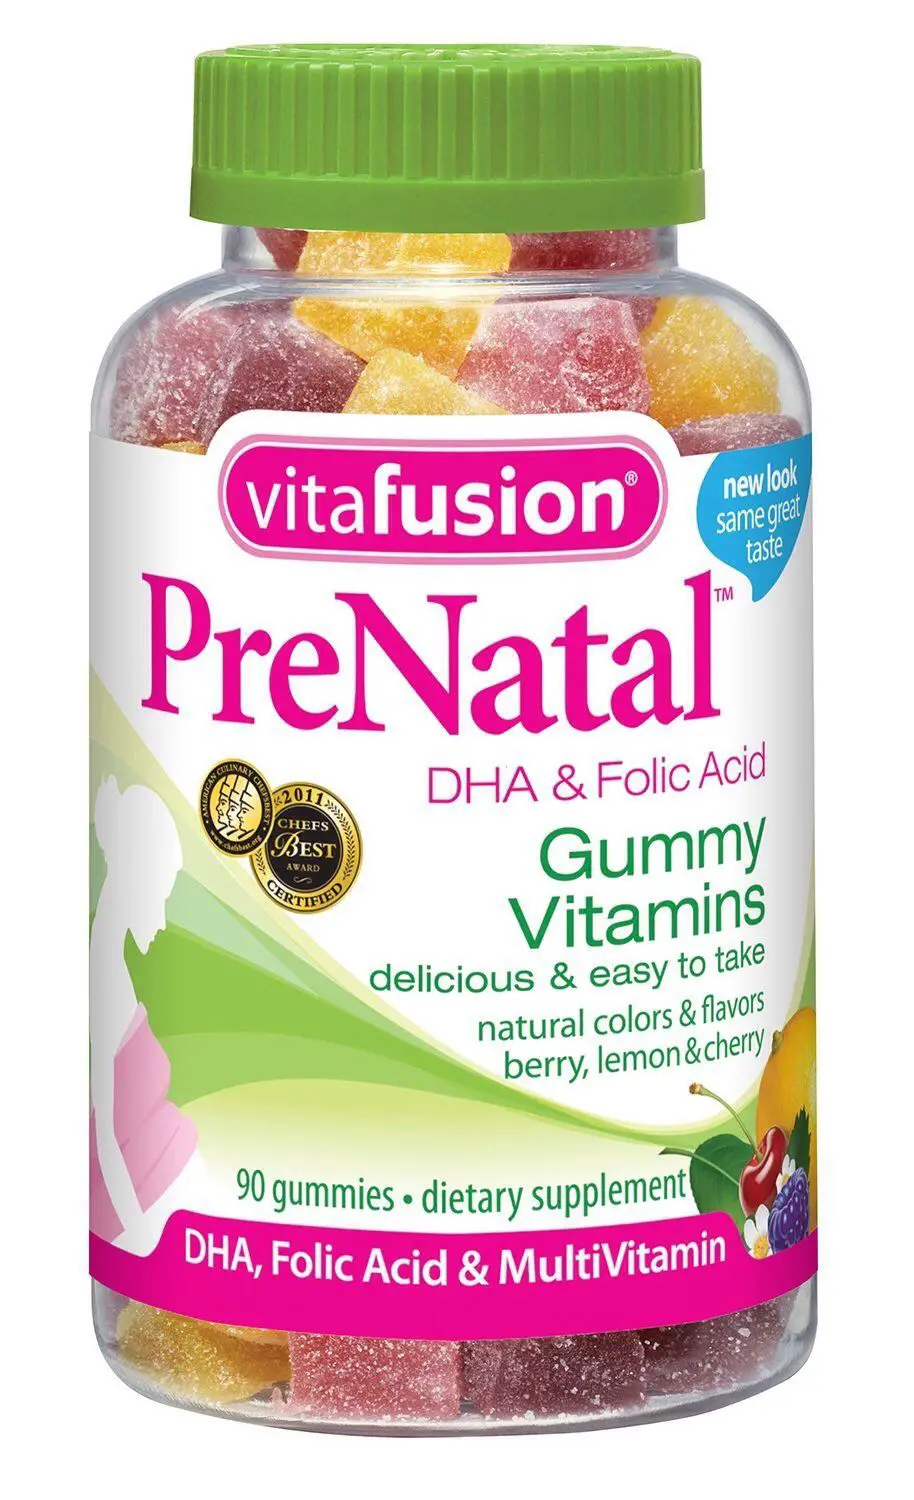 Take Prenatal Vitamins Even If Your Not Pregnant To Promote Hair Growth ...